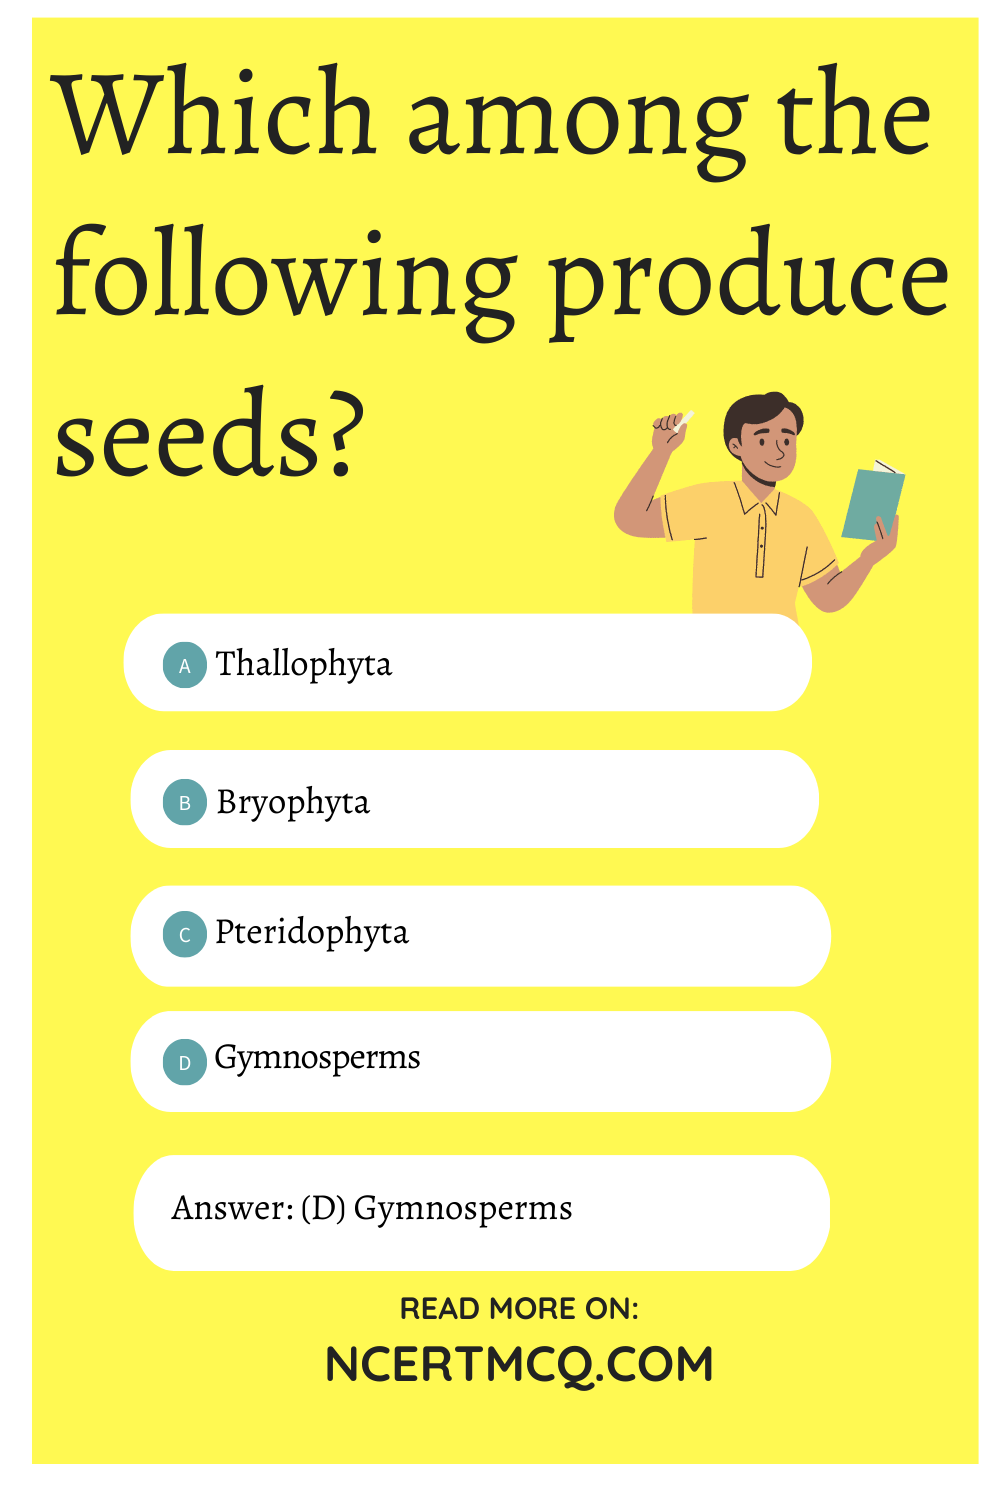 Which among the following produce seeds?